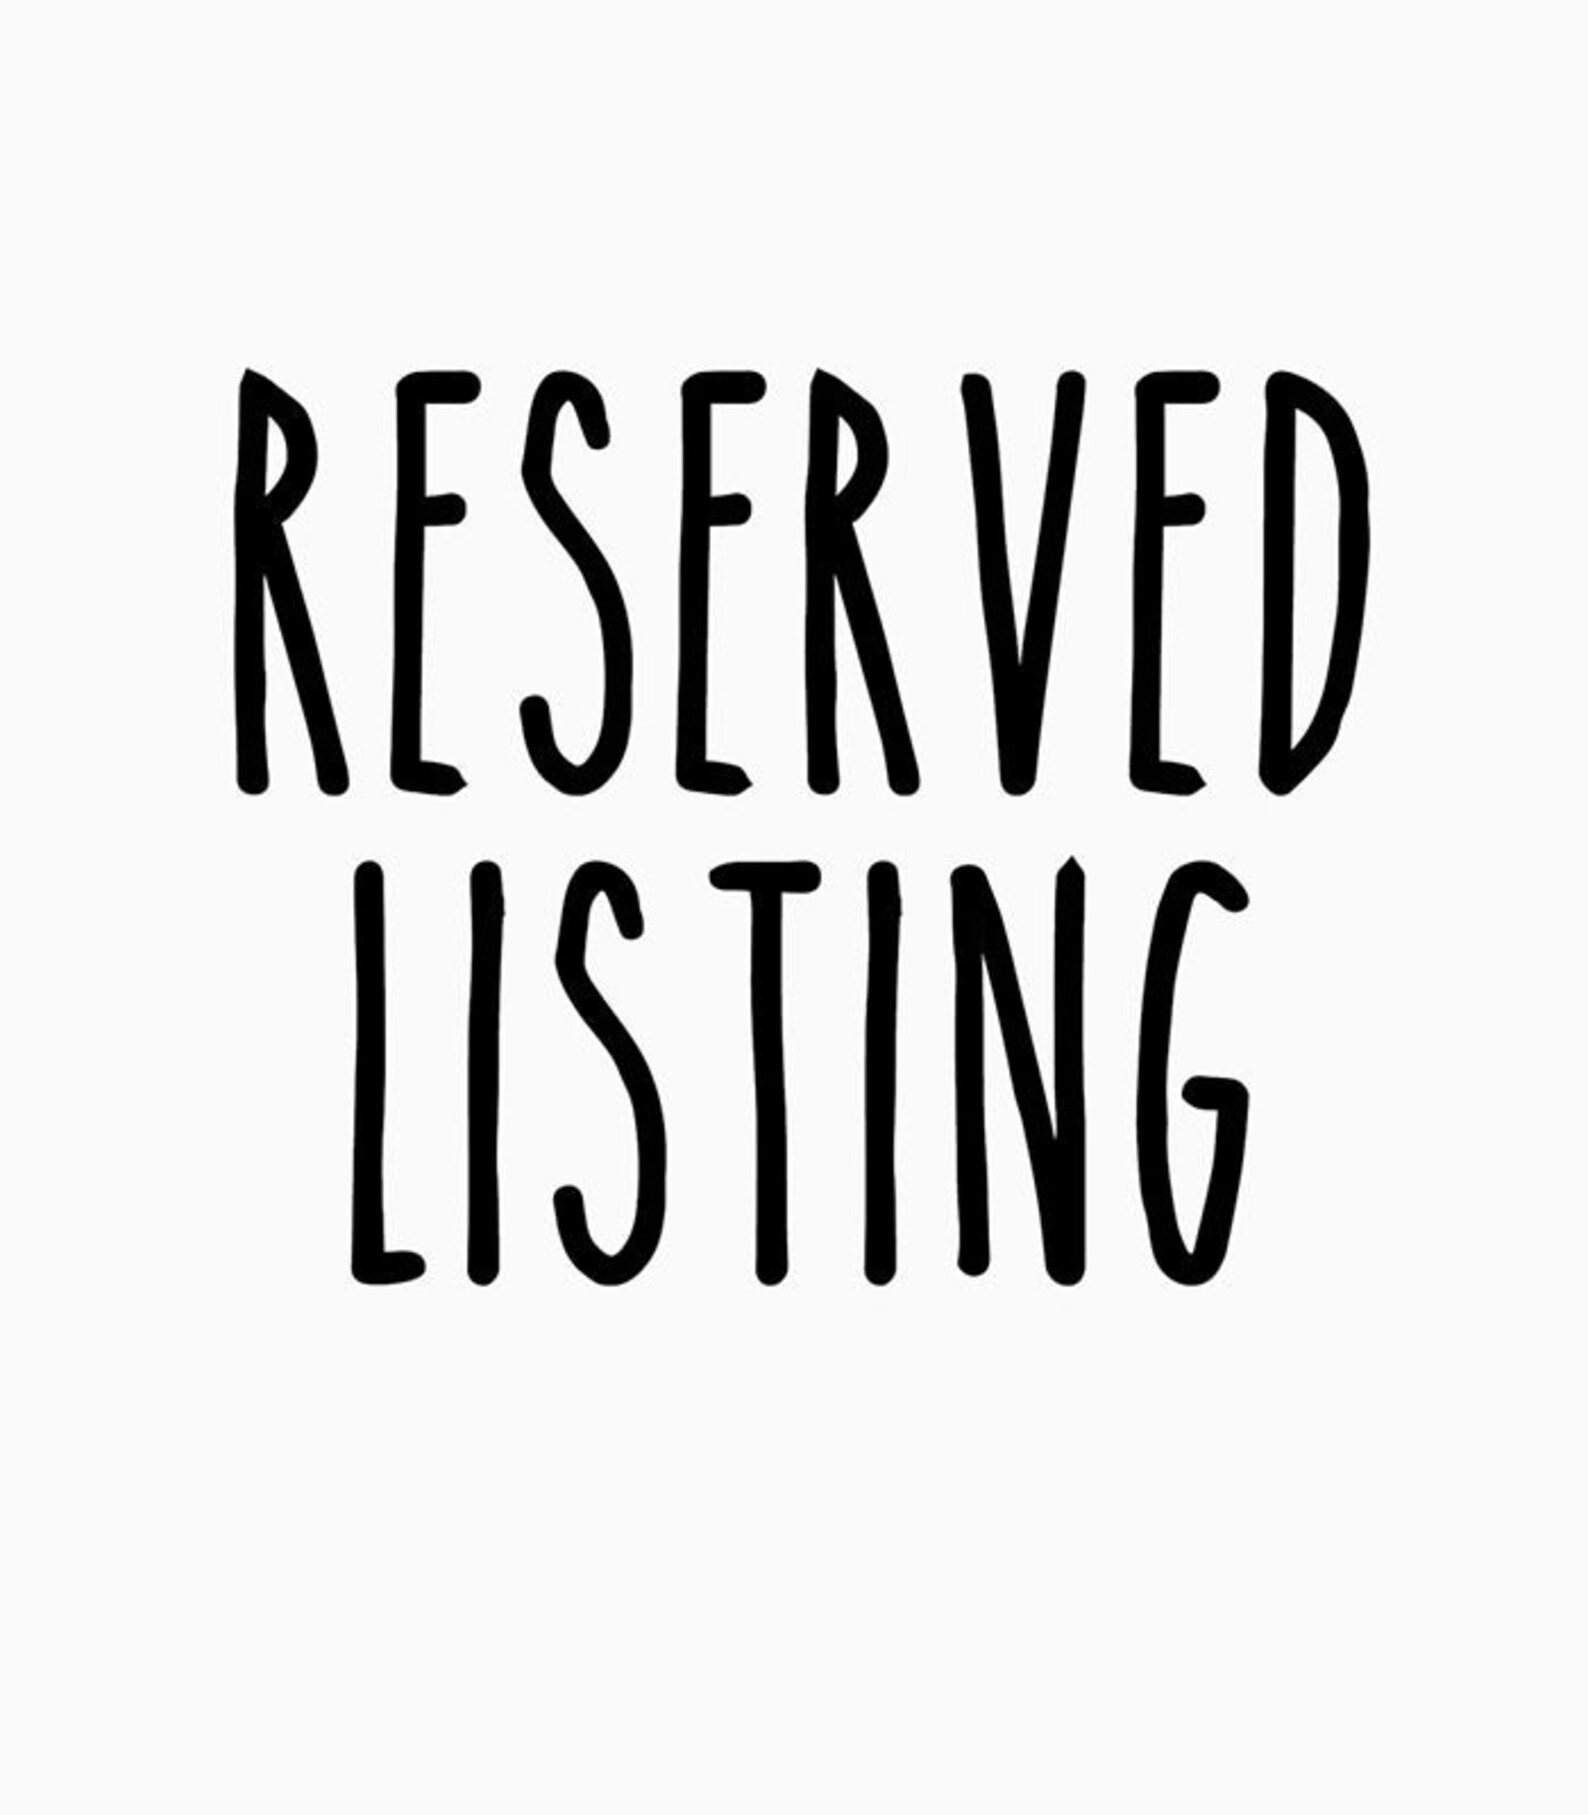 RESERVED LISTING Shipping details | Etsy